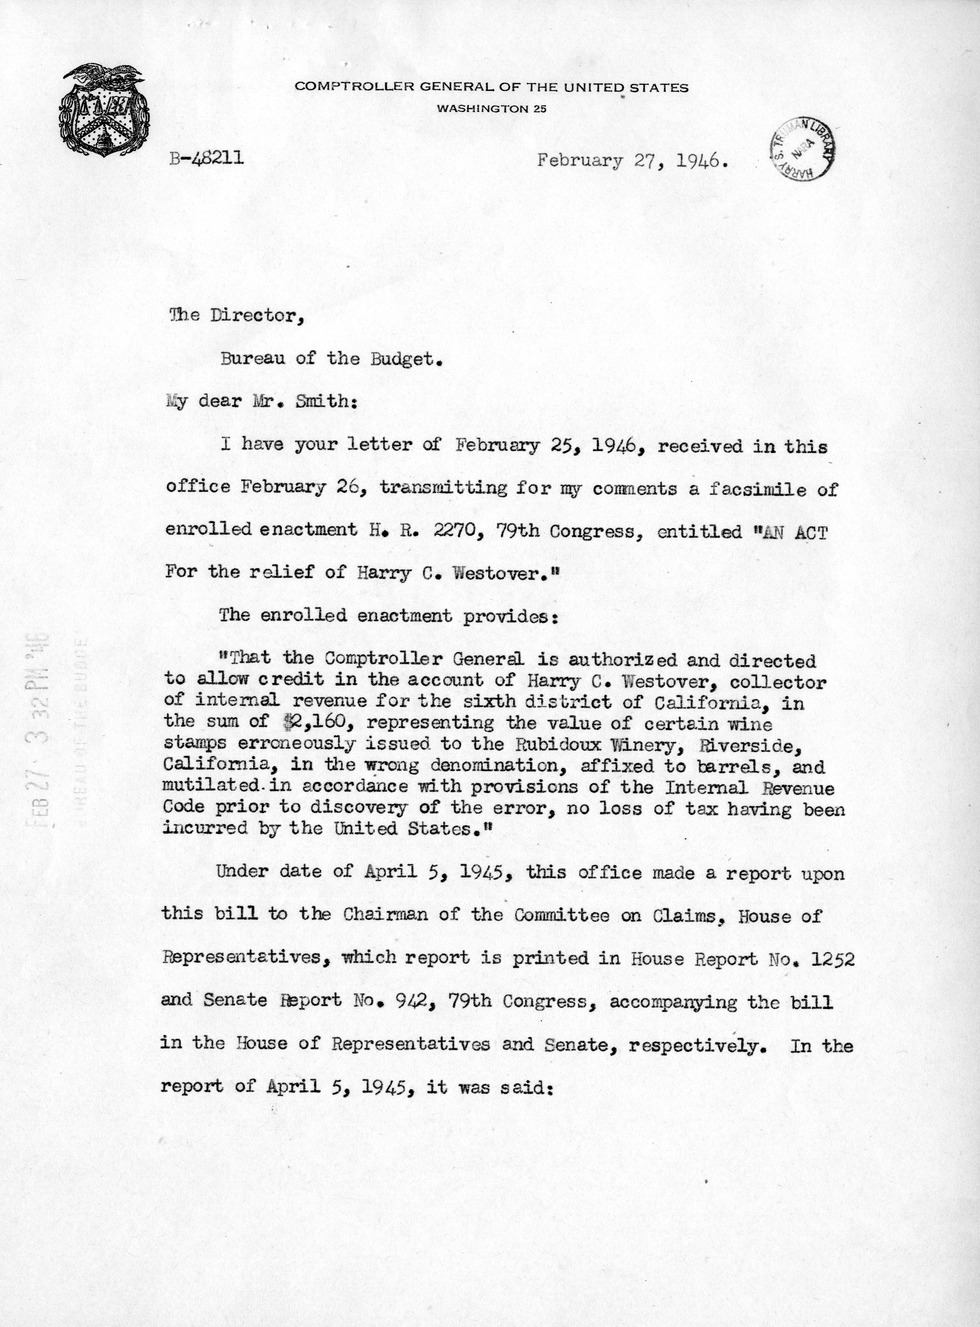 Memorandum from Frederick J. Bailey to M. C. Latta, H. R. 2270, For the Relief of Harry C. Westover, with Attachments